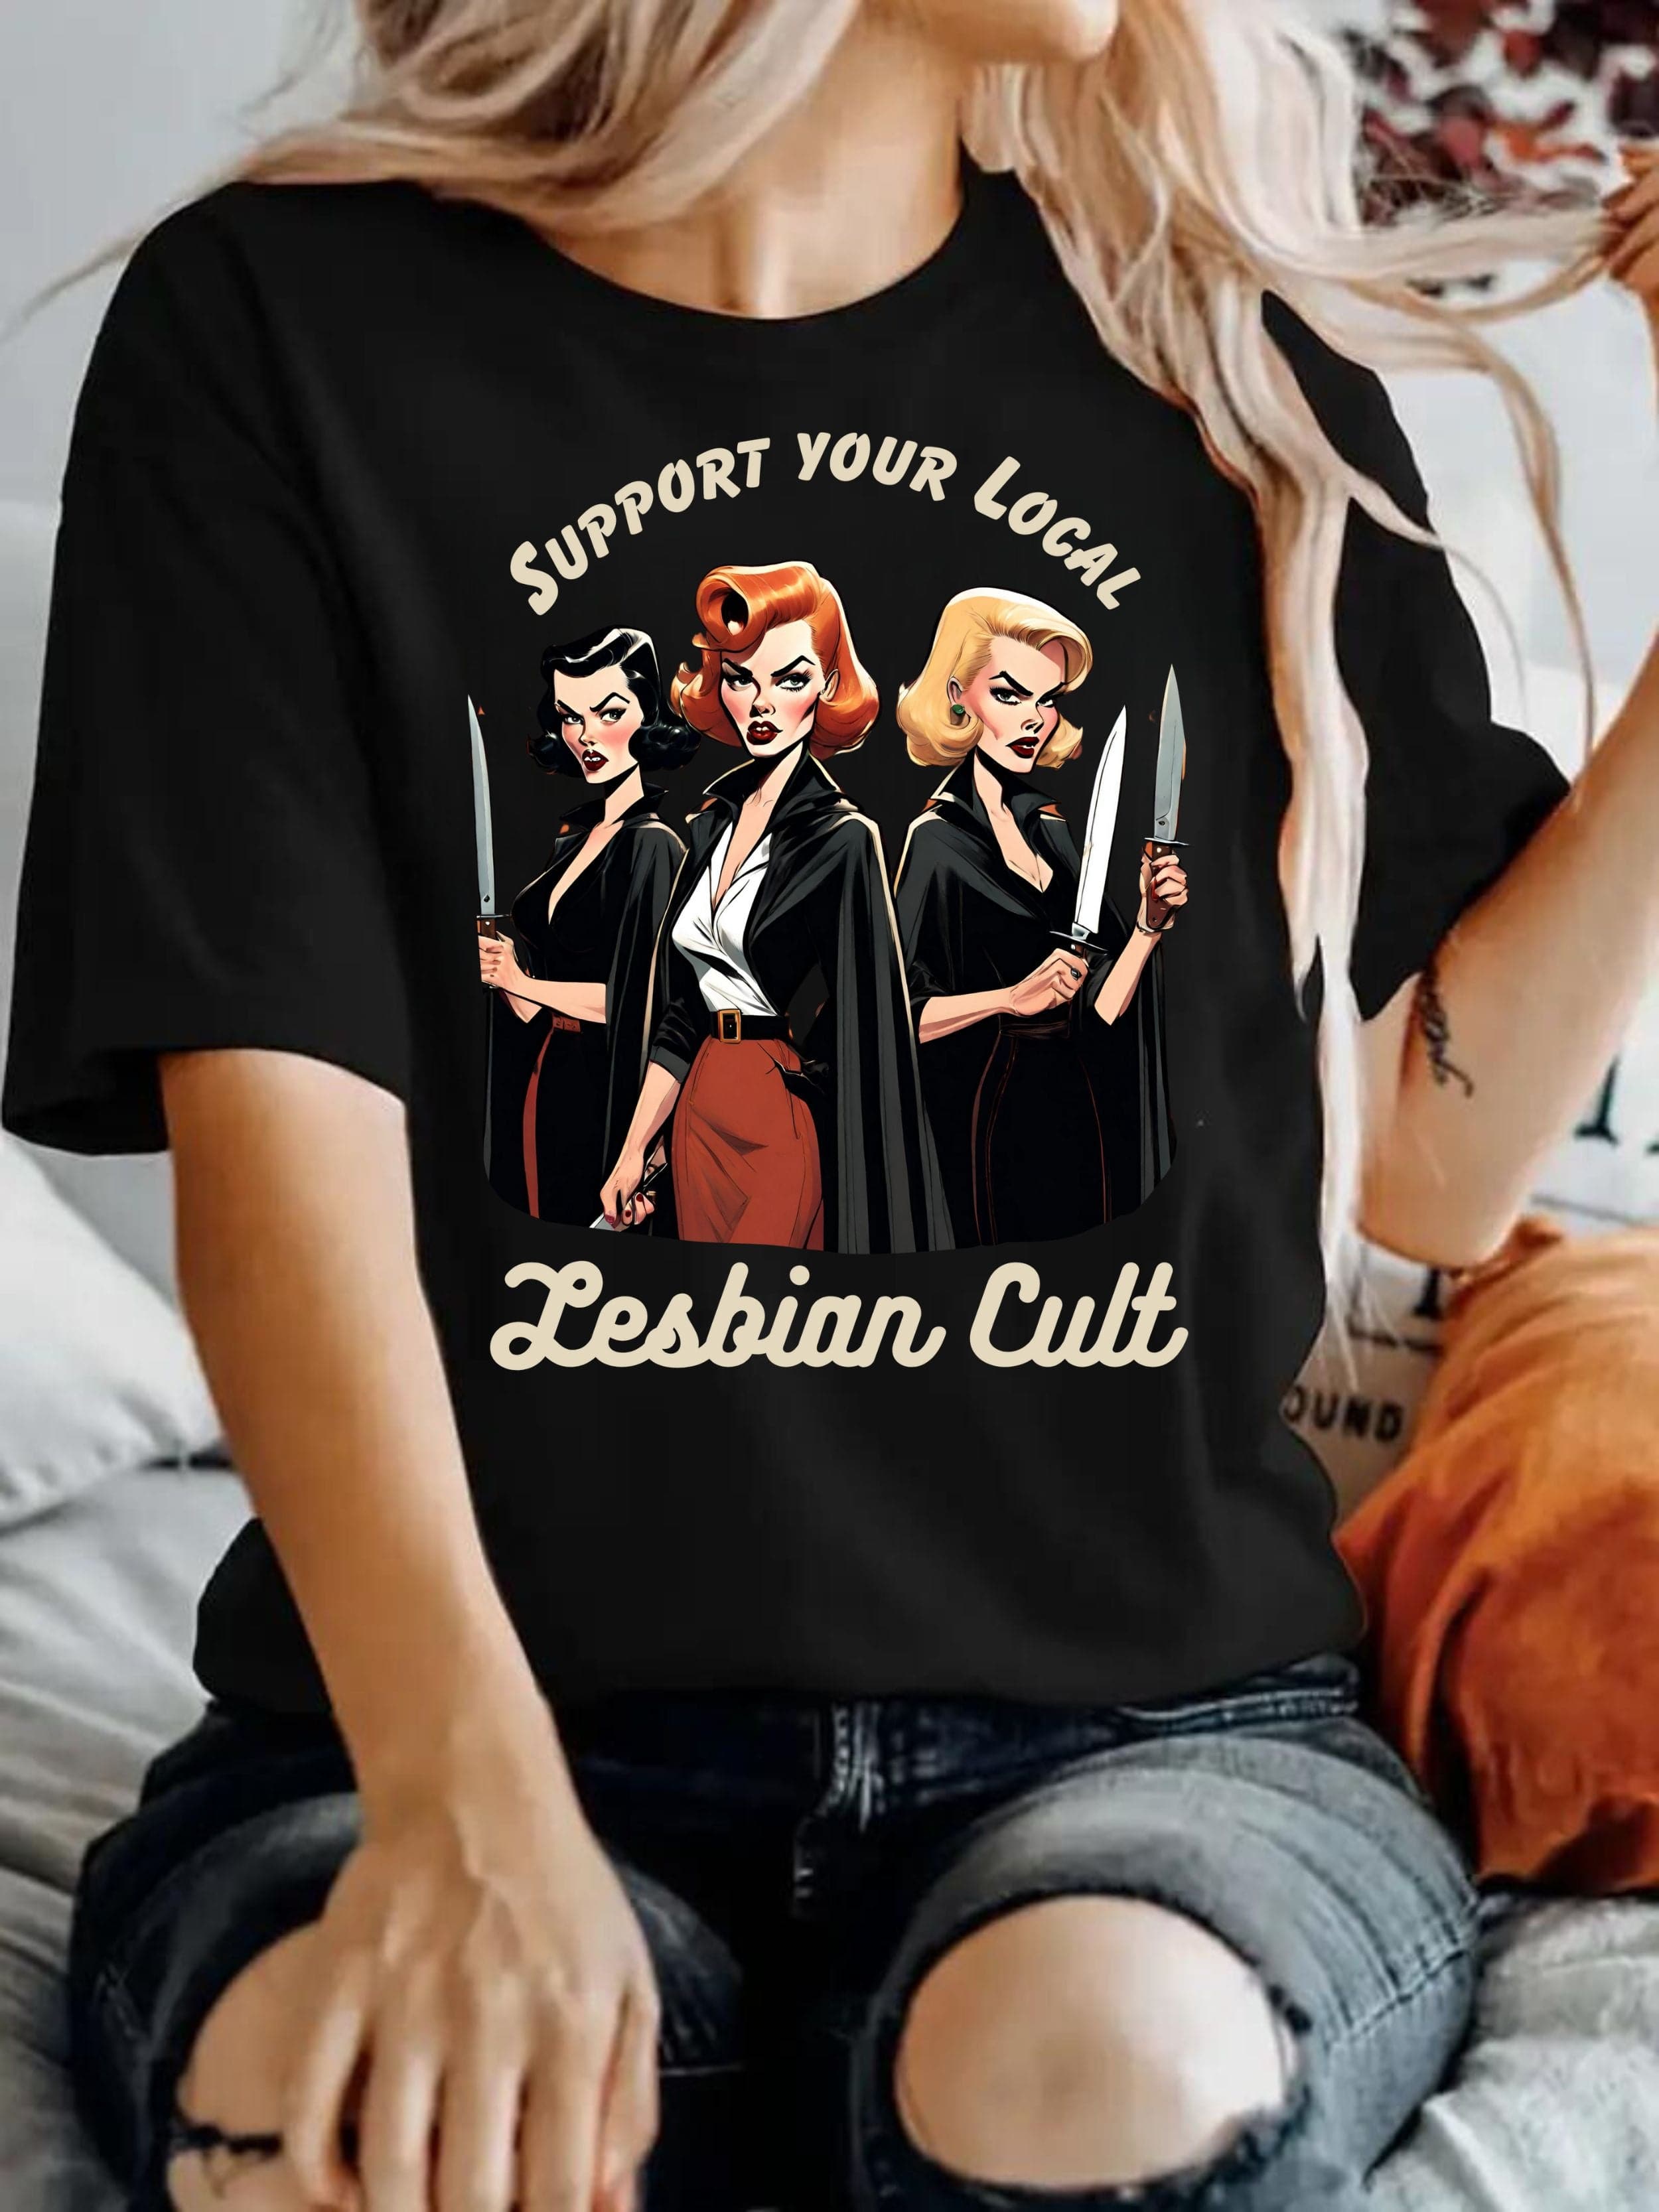 Support Your Local lesbian Cult Unisex t-shirt